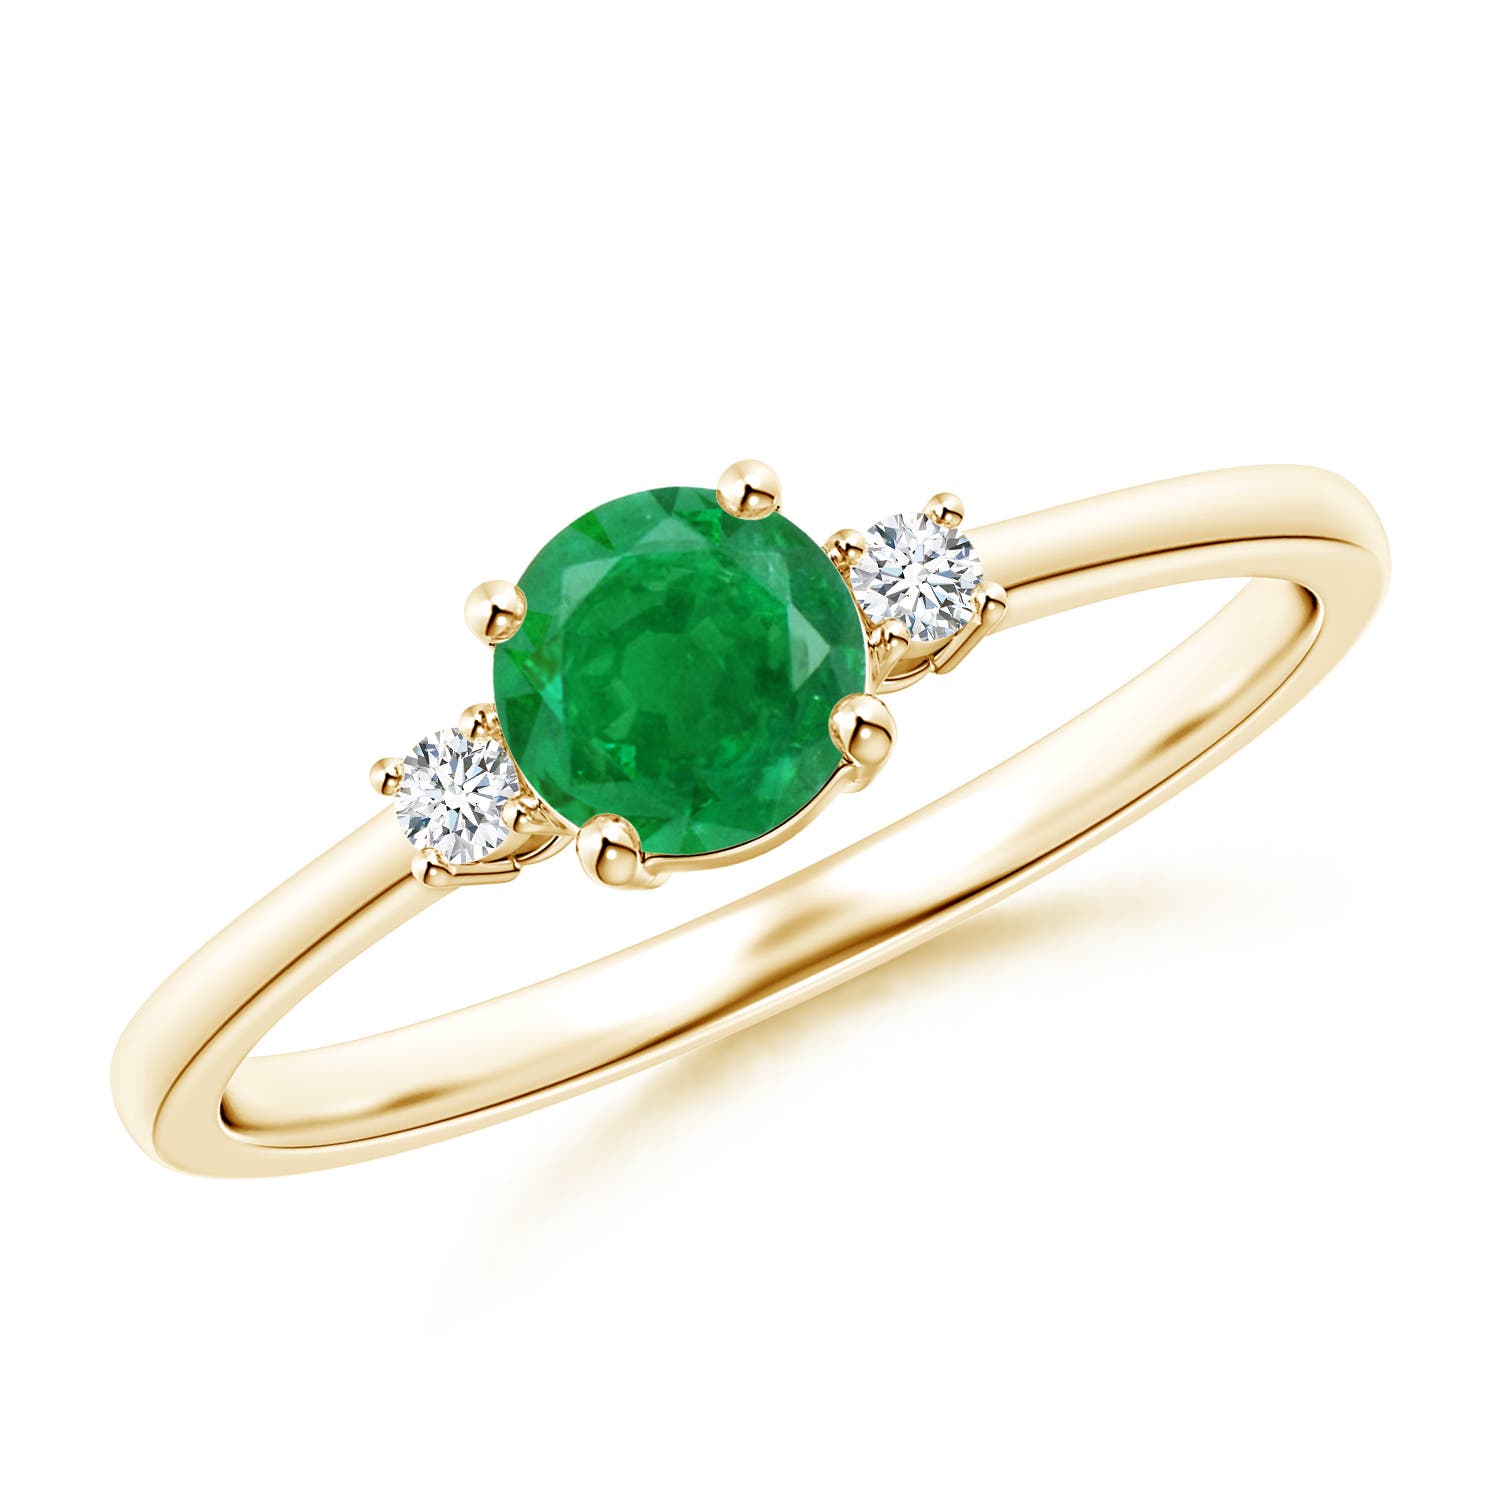 AA - Emerald / 0.51 CT / 14 KT Yellow Gold